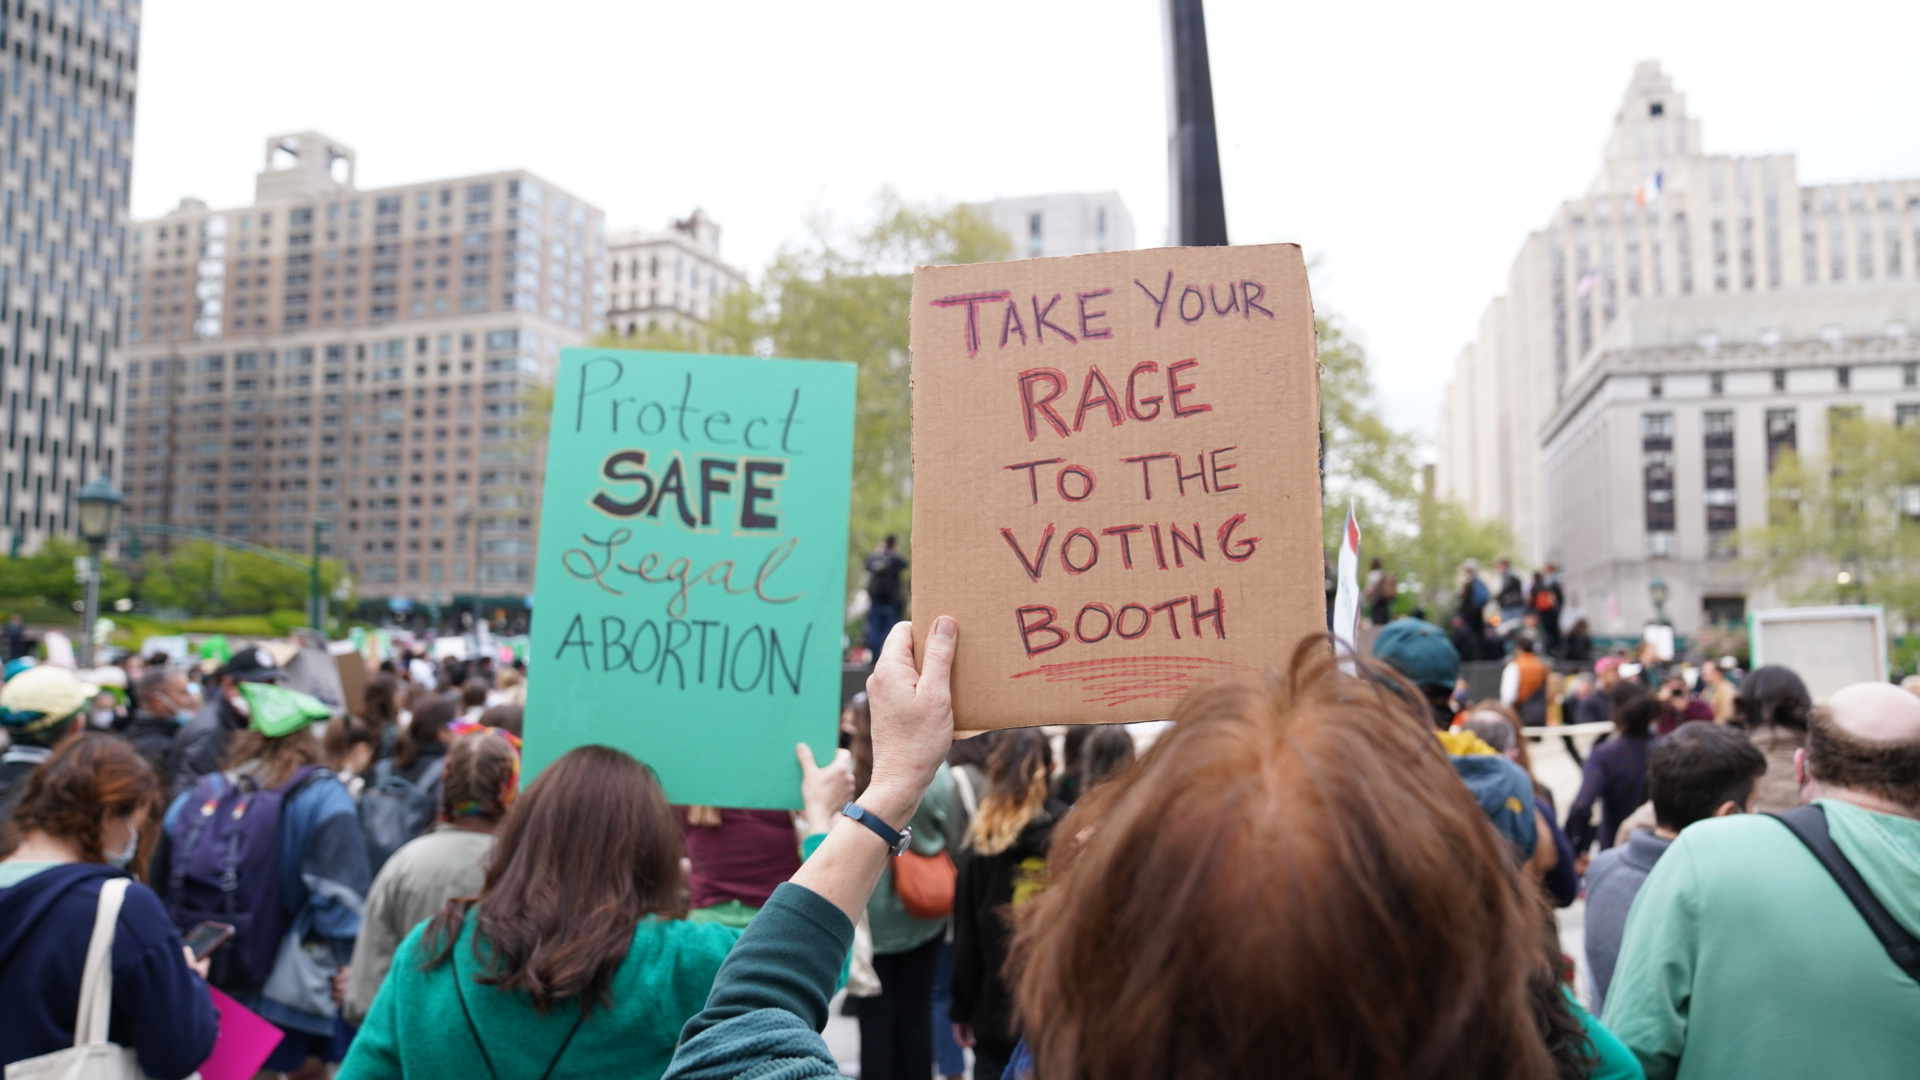 People holding signs at an abortion rights protest